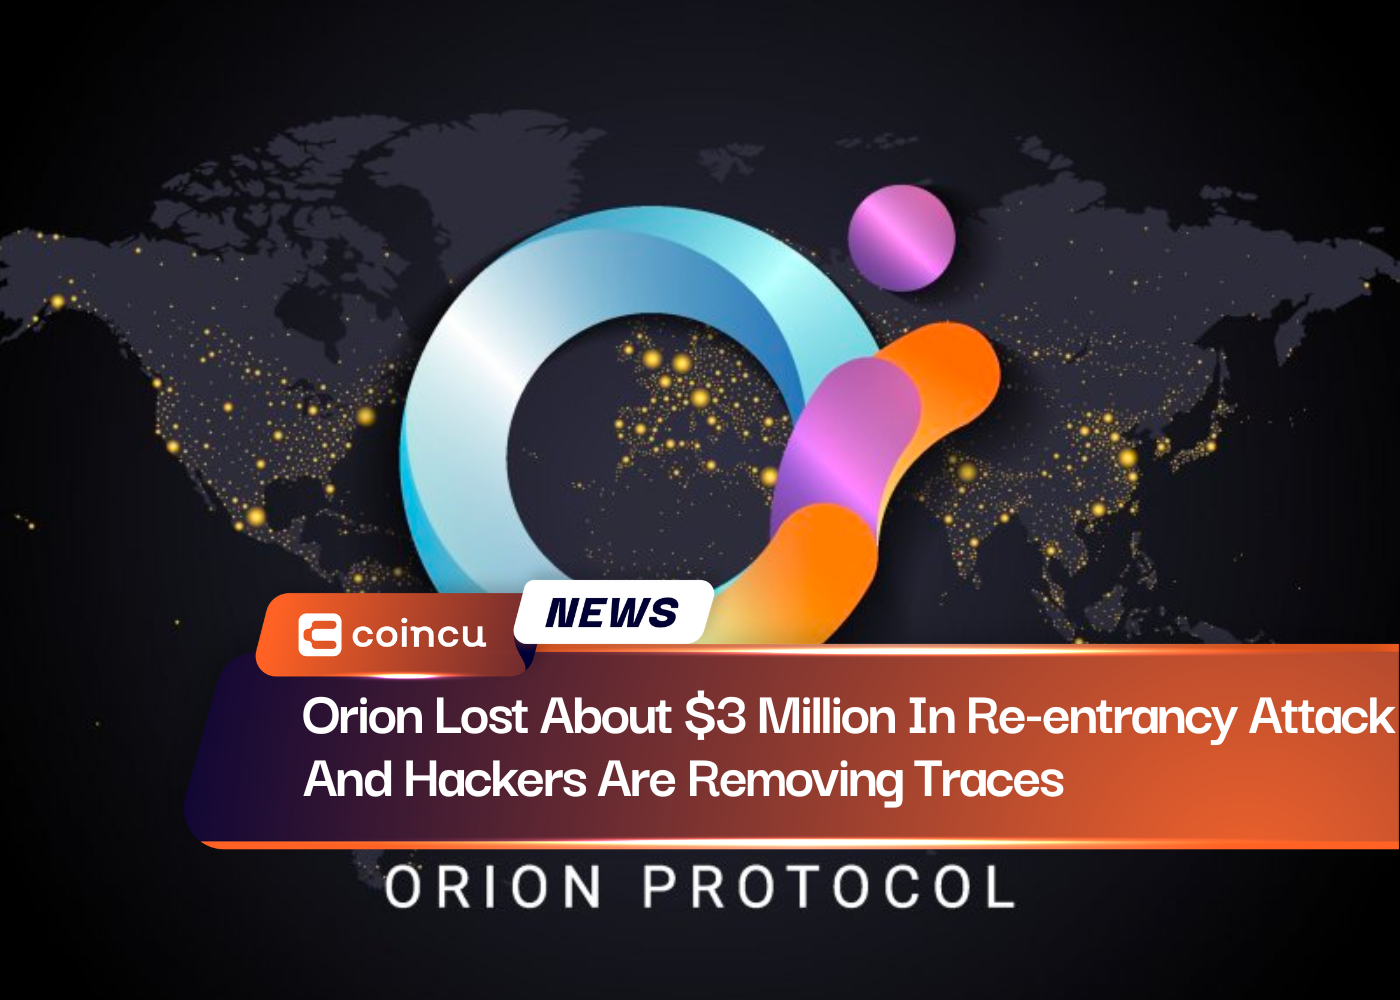 Orion Lost About $3 Million In Re-entrancy Attack And Hackers Are Removing Traces